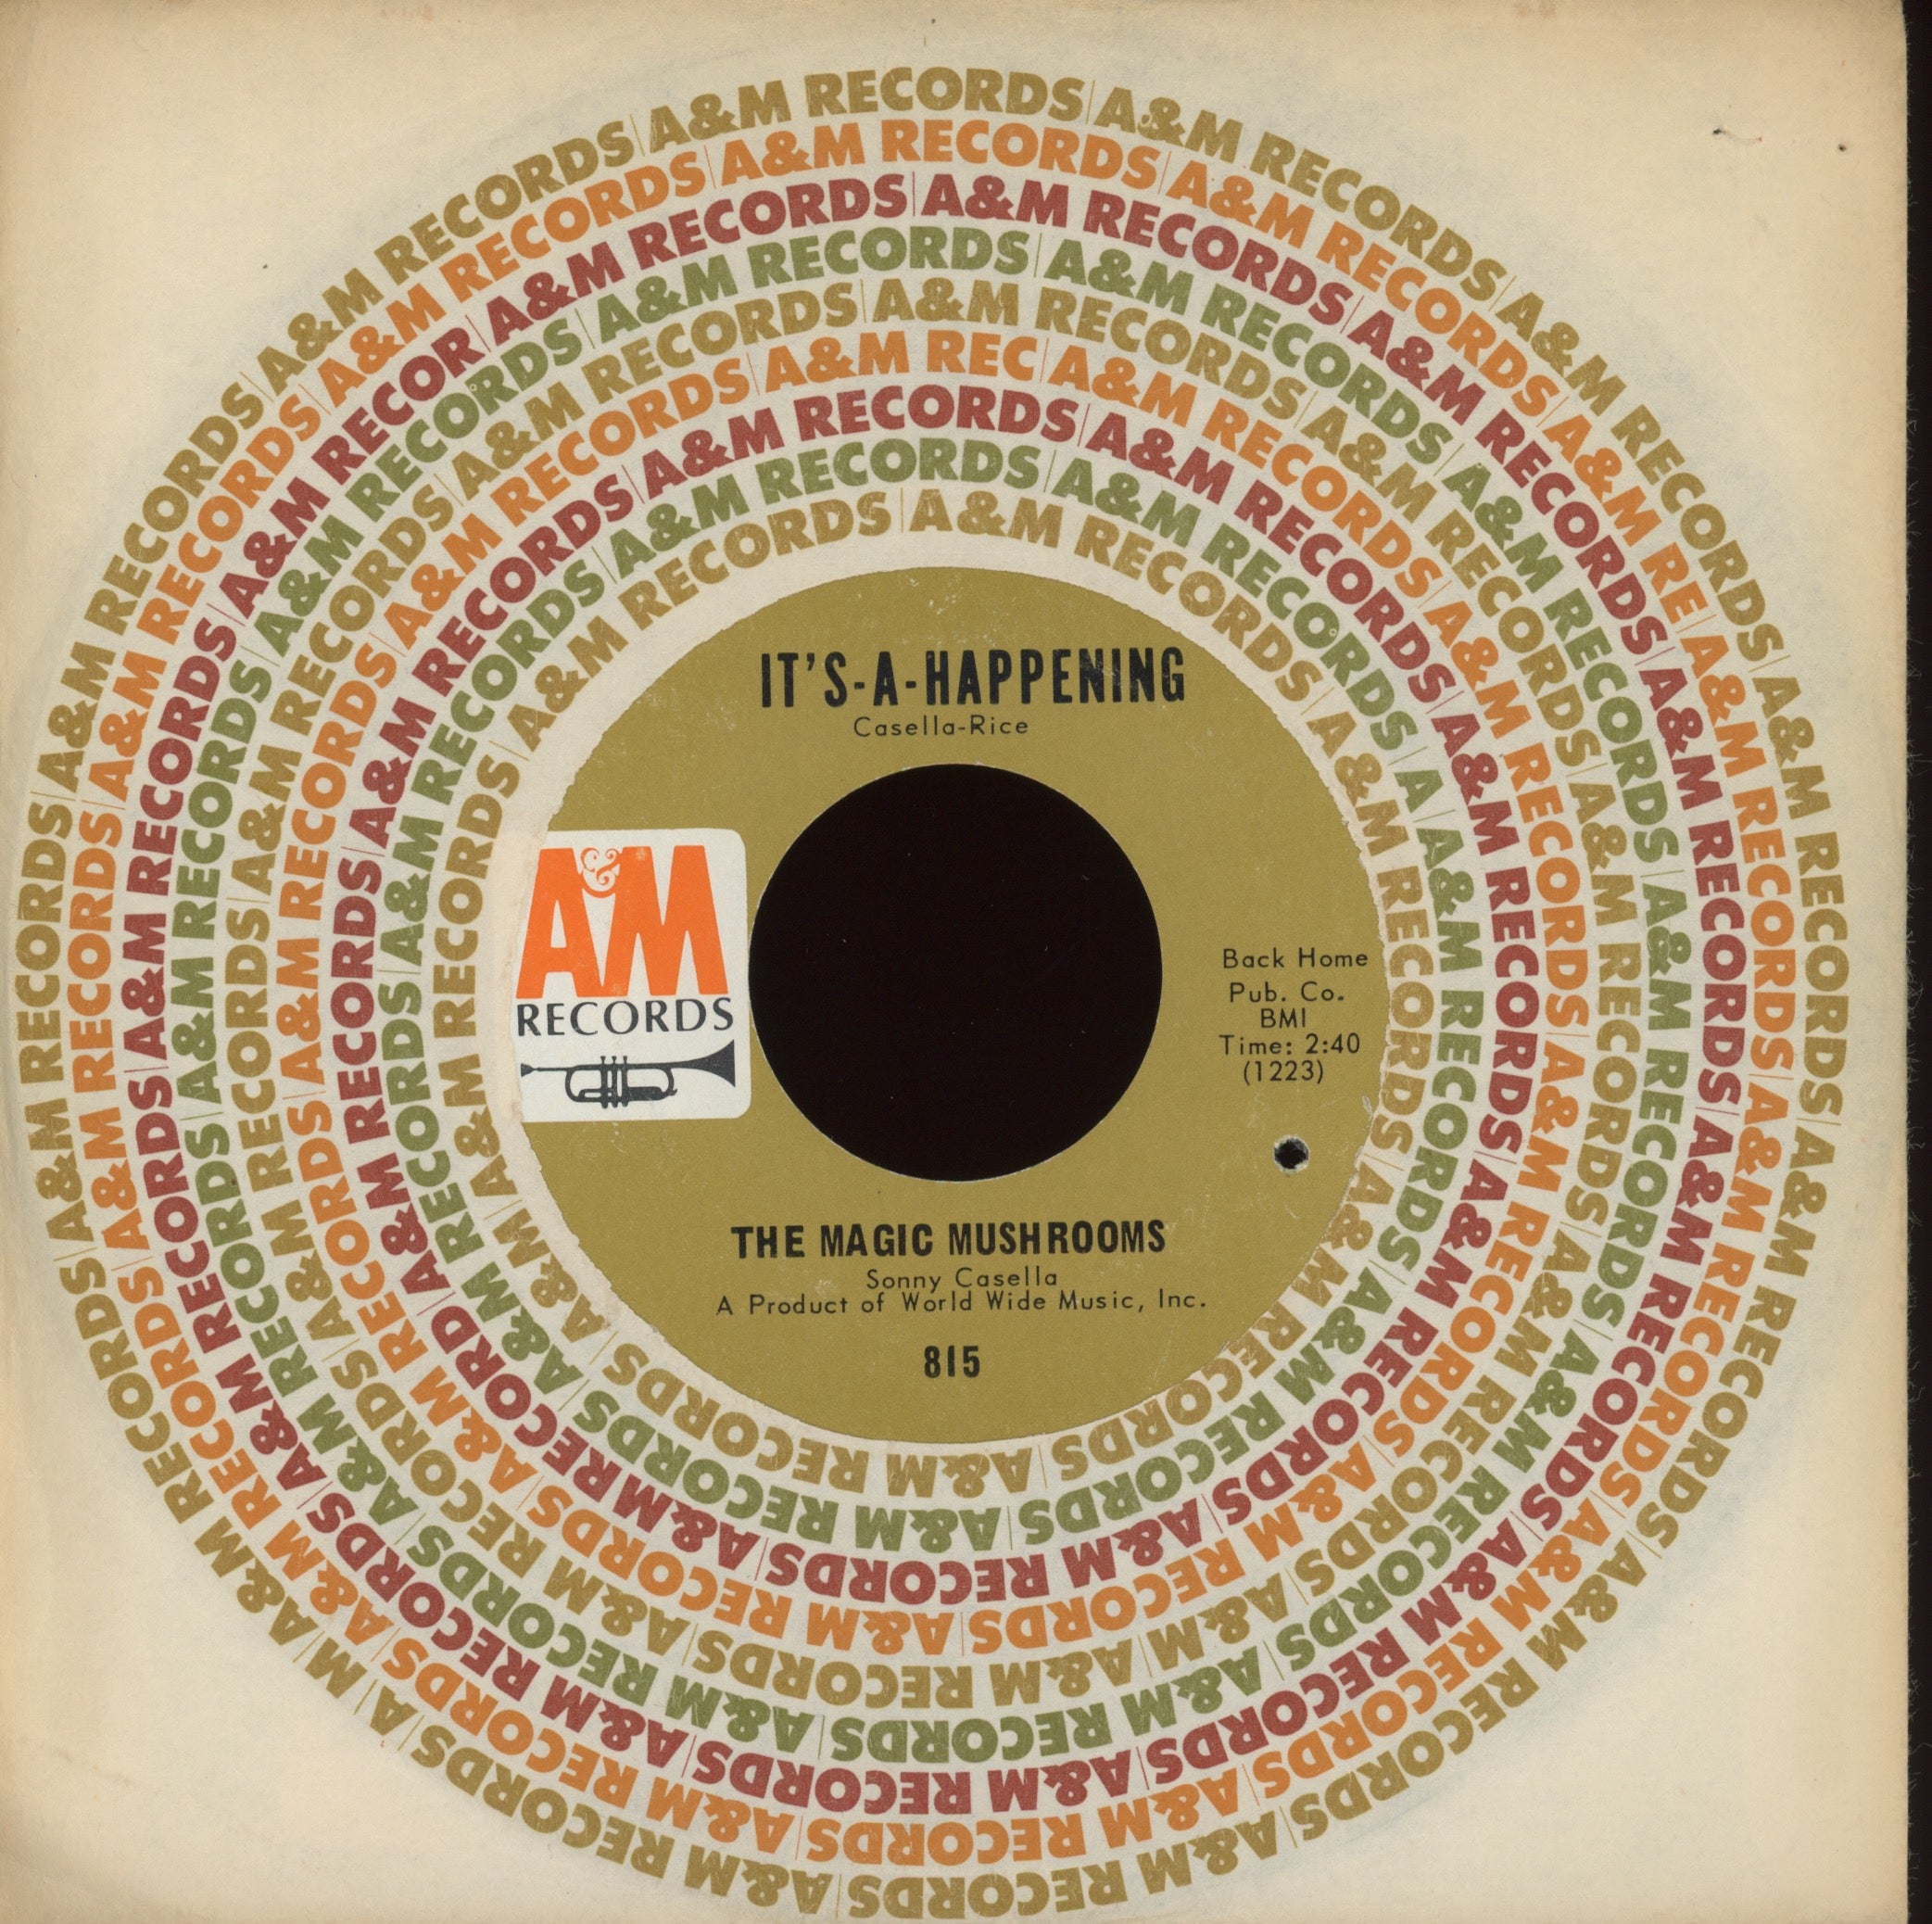 The Magic Mushrooms - It's-A-Happening on A&M Psych Rock 45